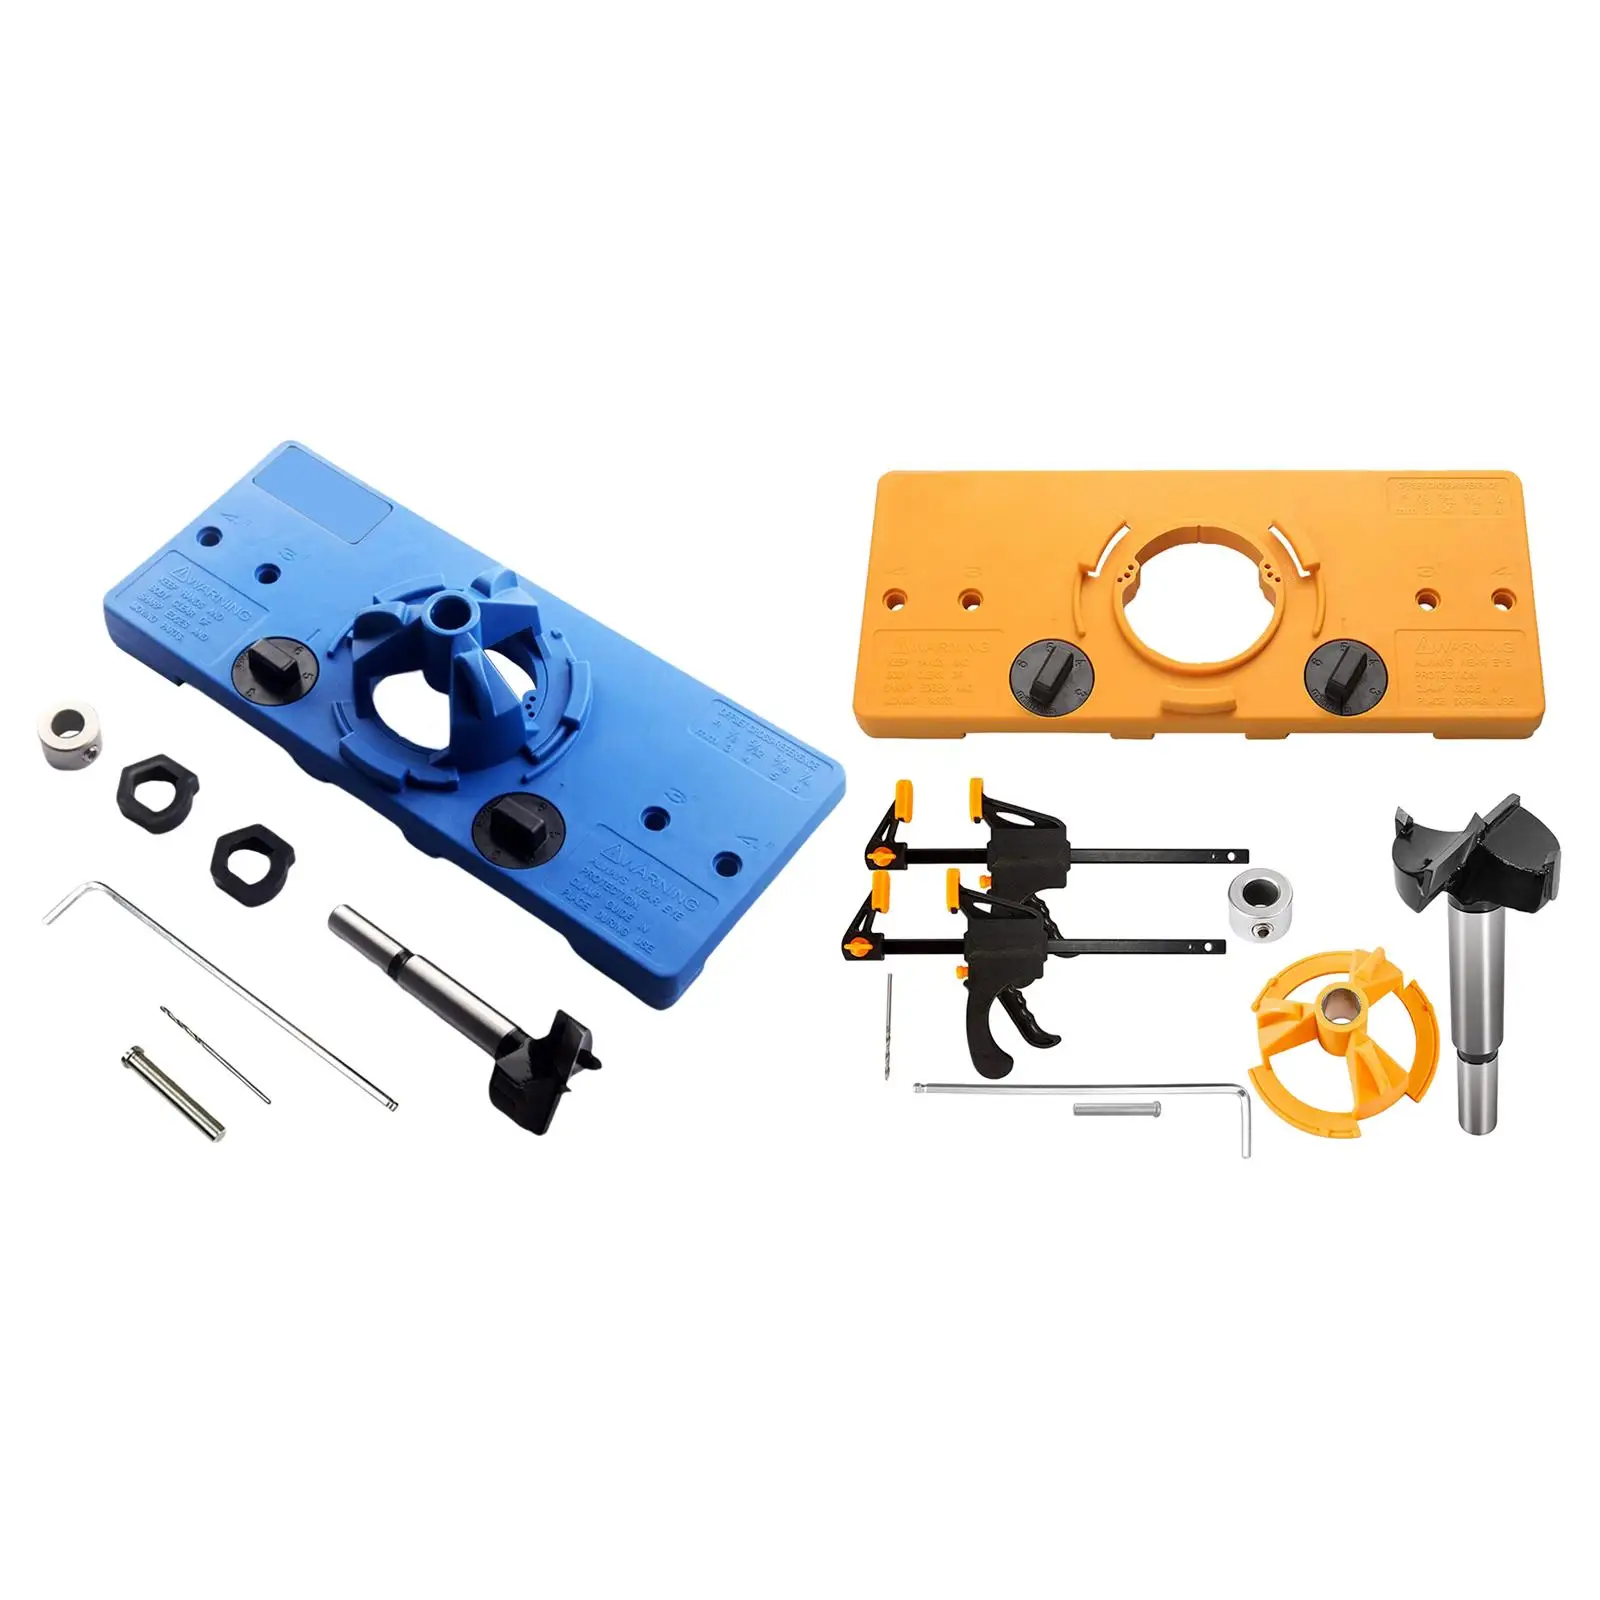 35mm Hinge Drilling Jig Guide Locator Hole Opener Fixture Drilling Tool Door Hinge for Woodworking Household Cupboard Furniture wood router table